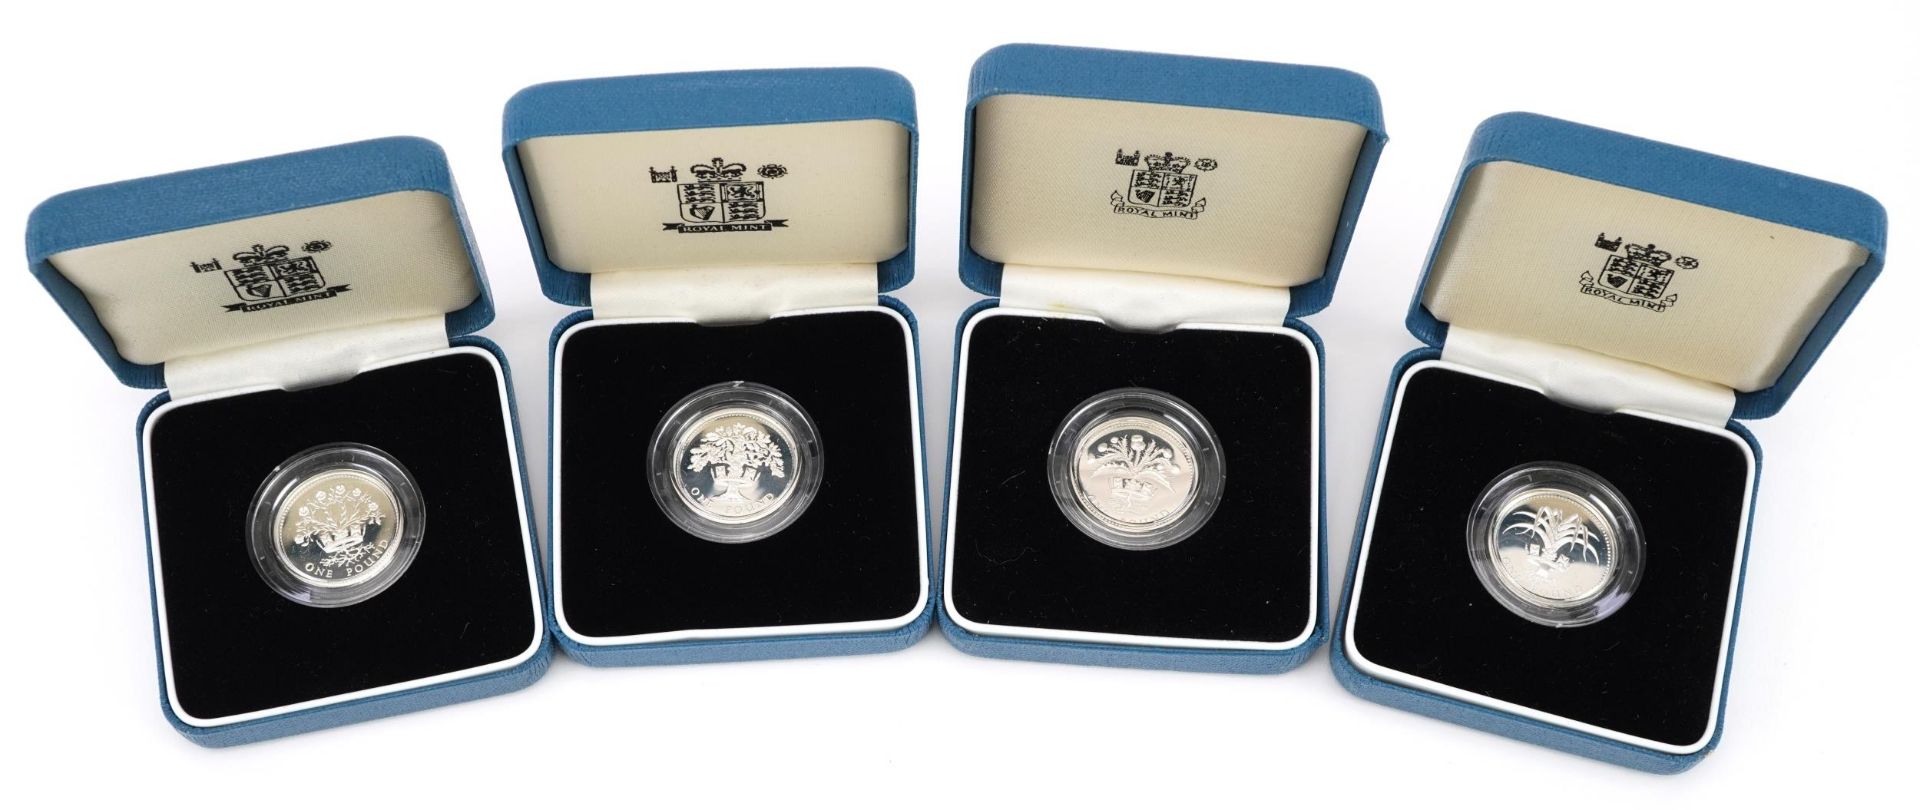 Four United Kingdom silver proof one pound coins by The Royal Mint with certificates and cases - Image 2 of 3